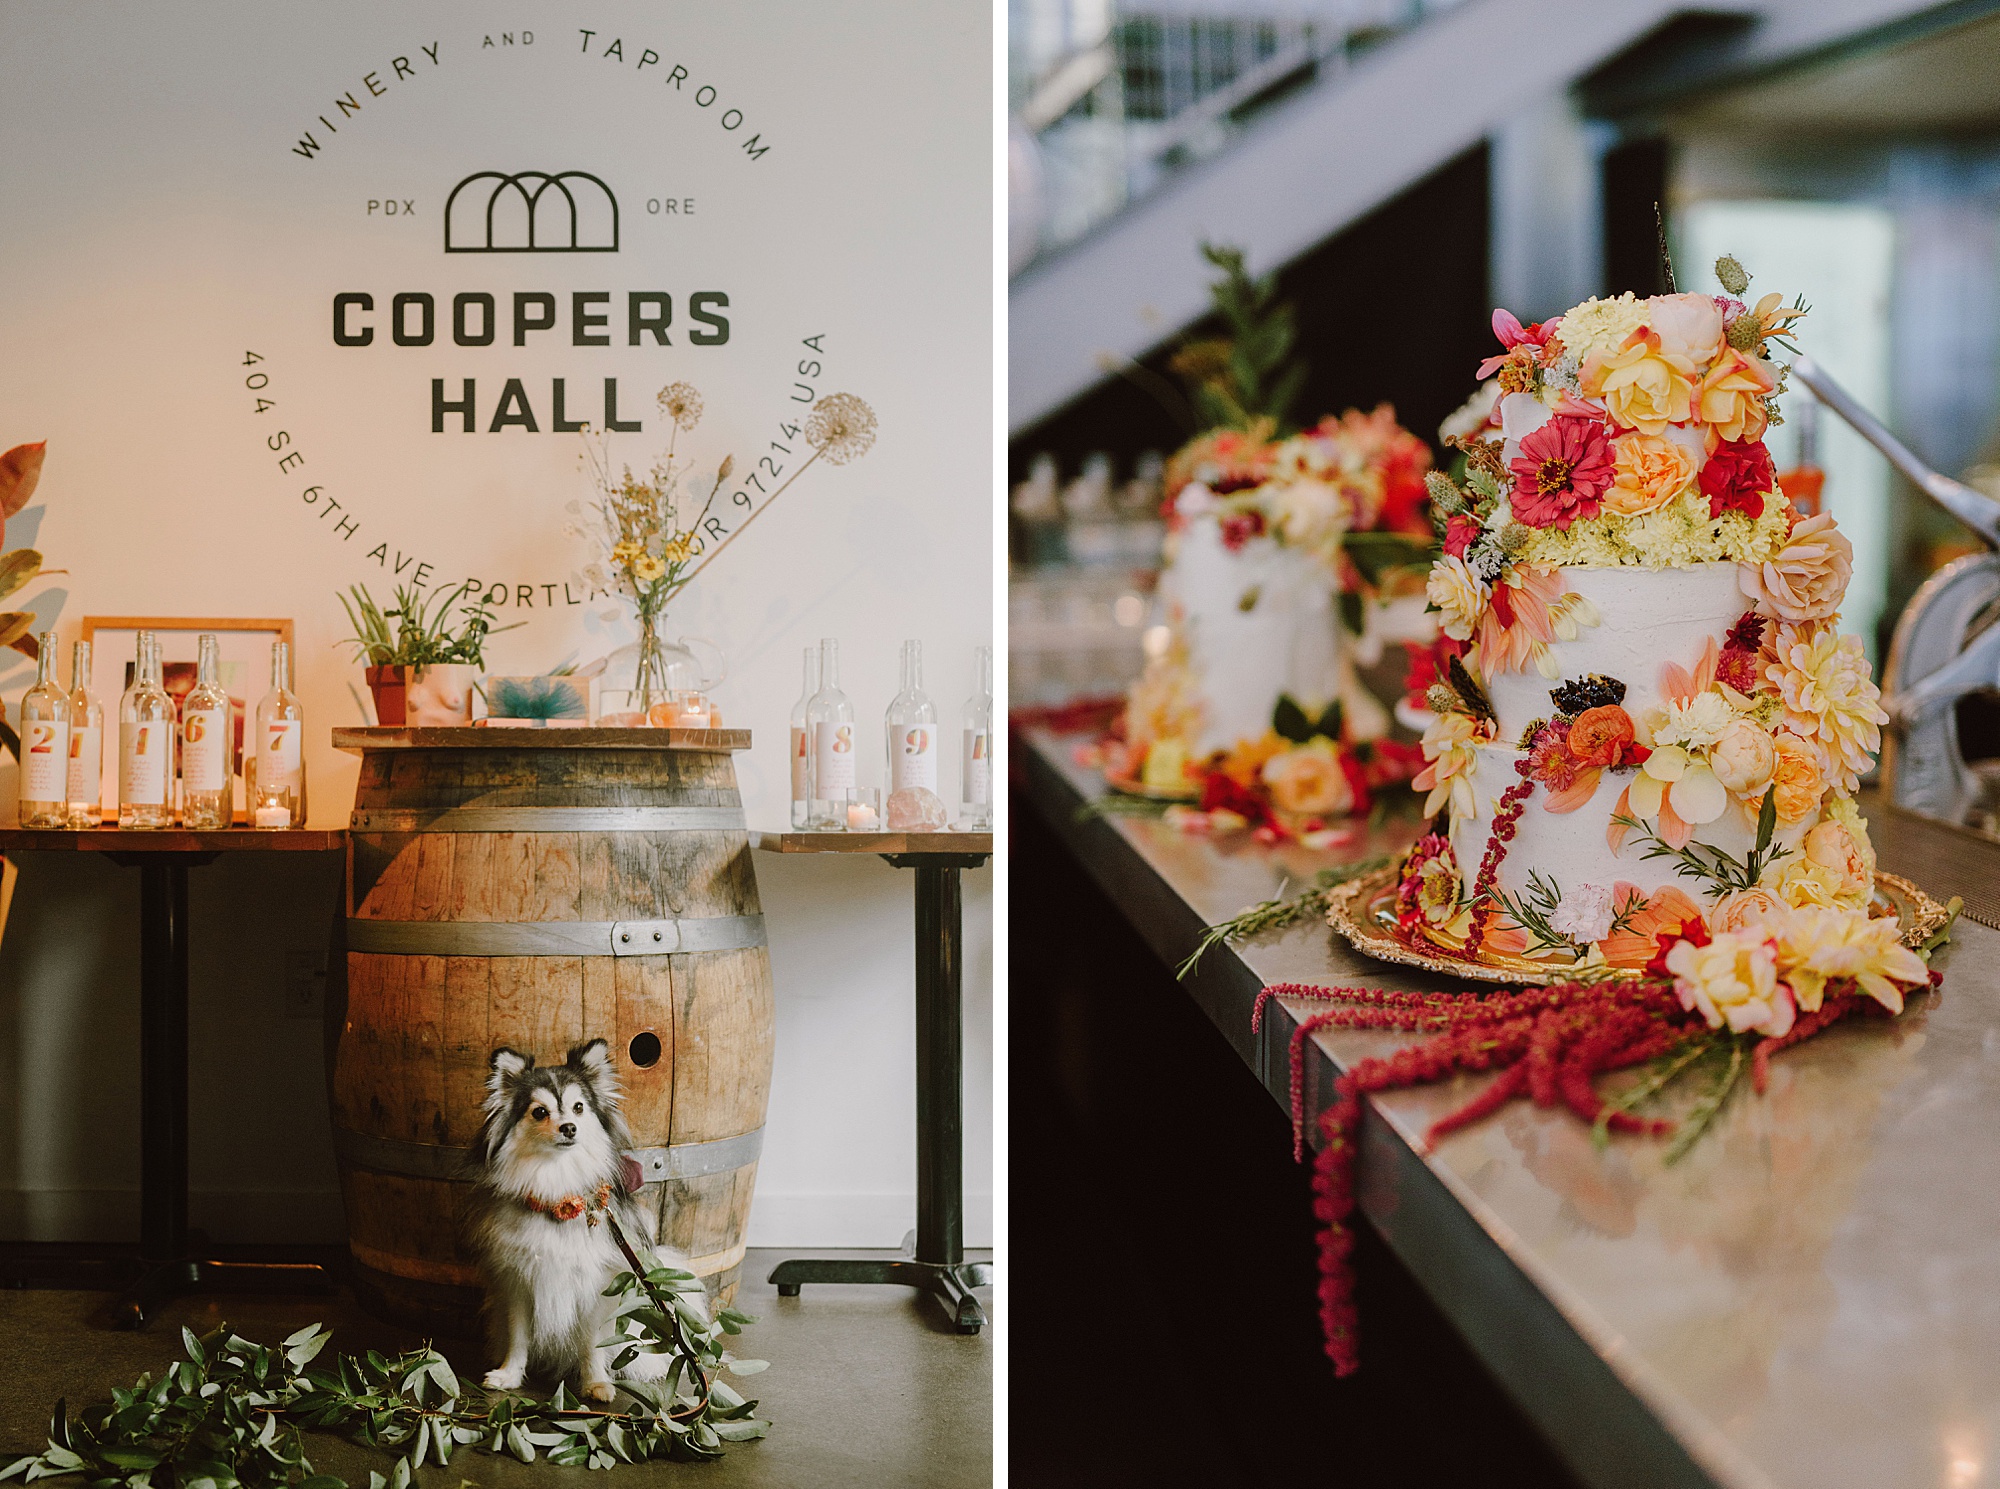 Wedding photography at Coopers Hall in Portland, OR